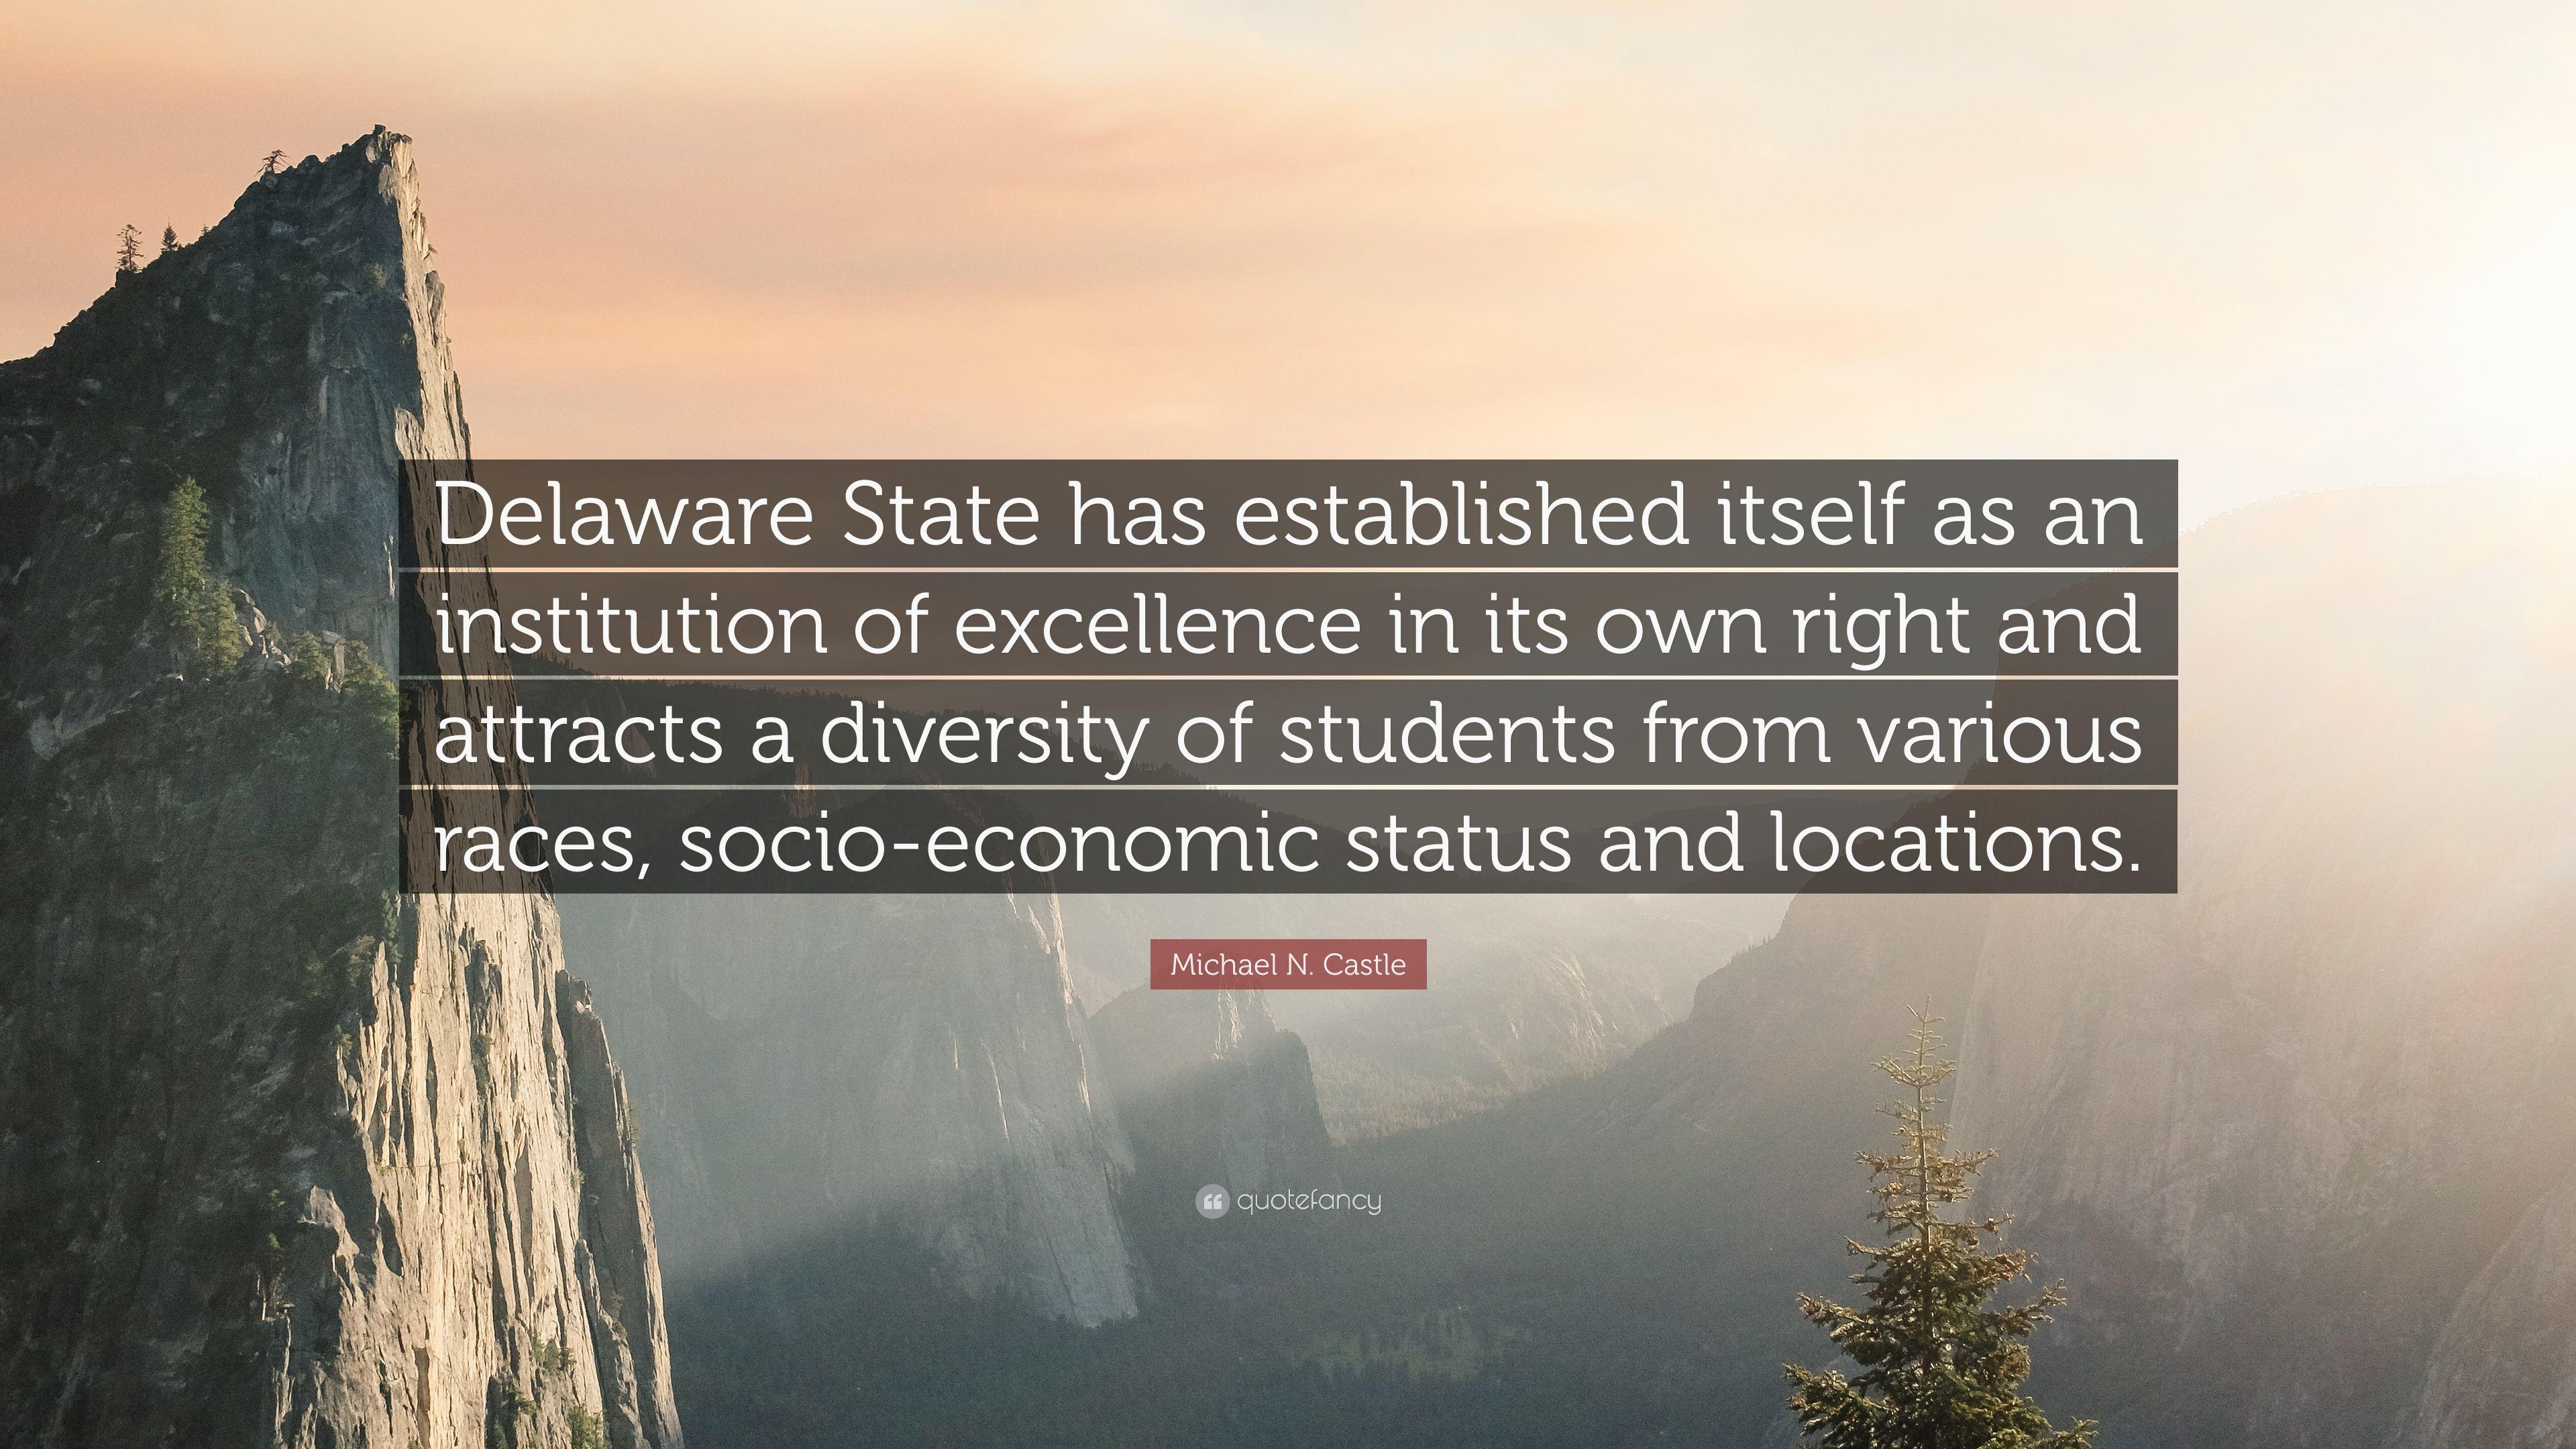 Michael N. Castle Quote: “Delaware State has established itself as